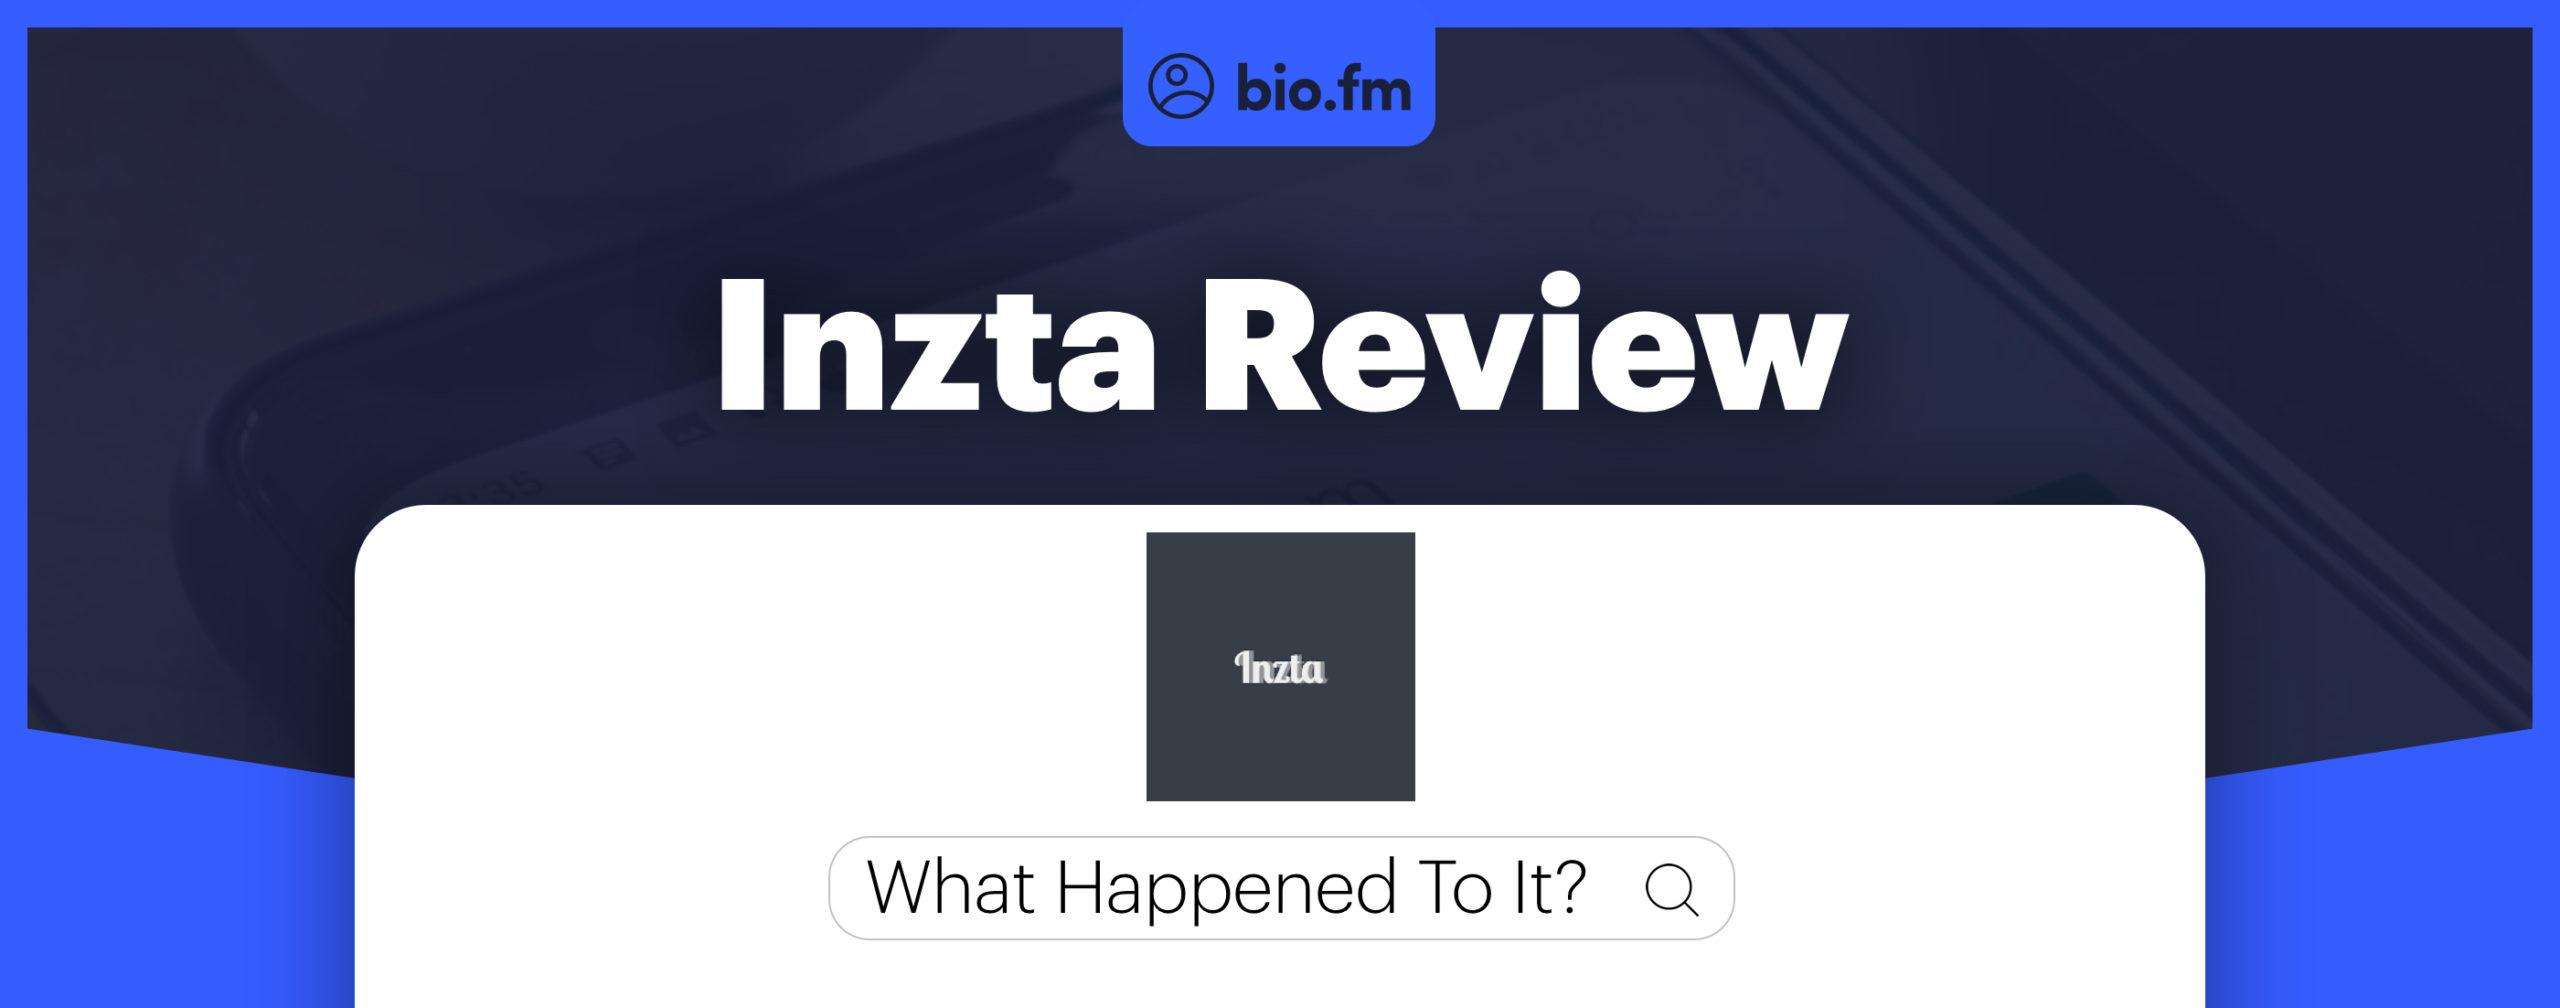 inzta review featured image